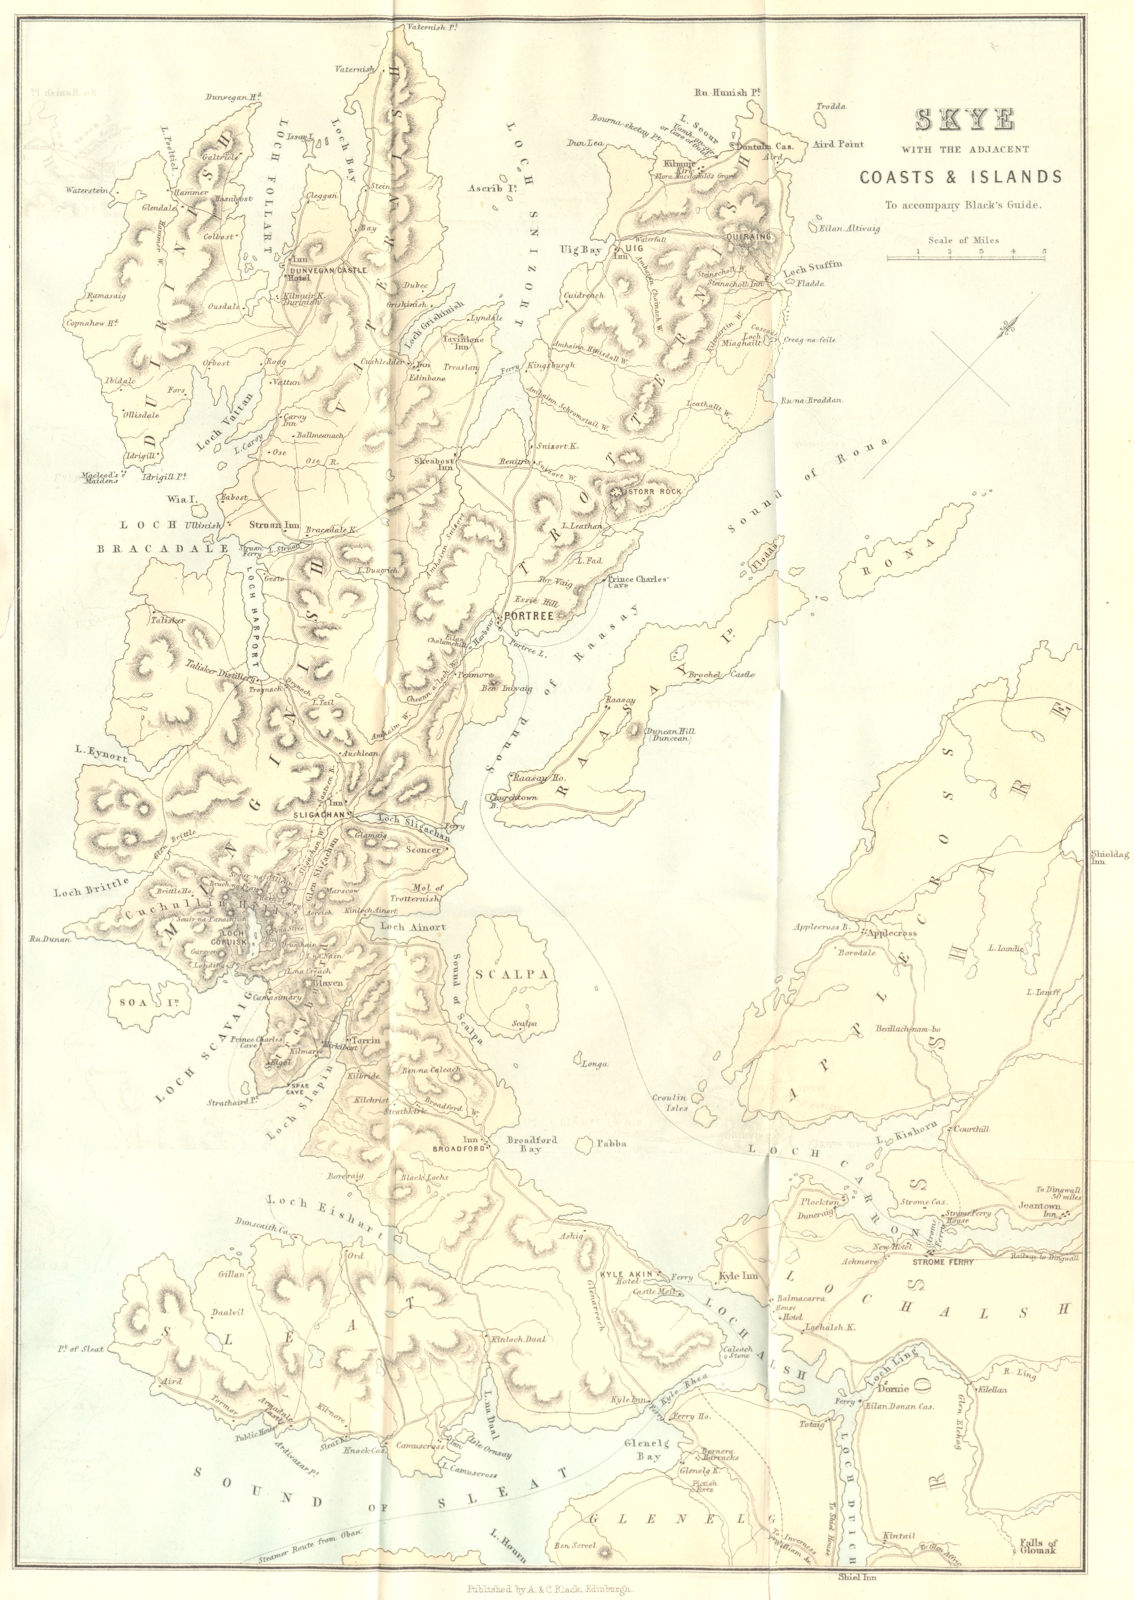 SCOTLAND. Skye with the adjacent coasts & islands. Ross shire 1887 old map